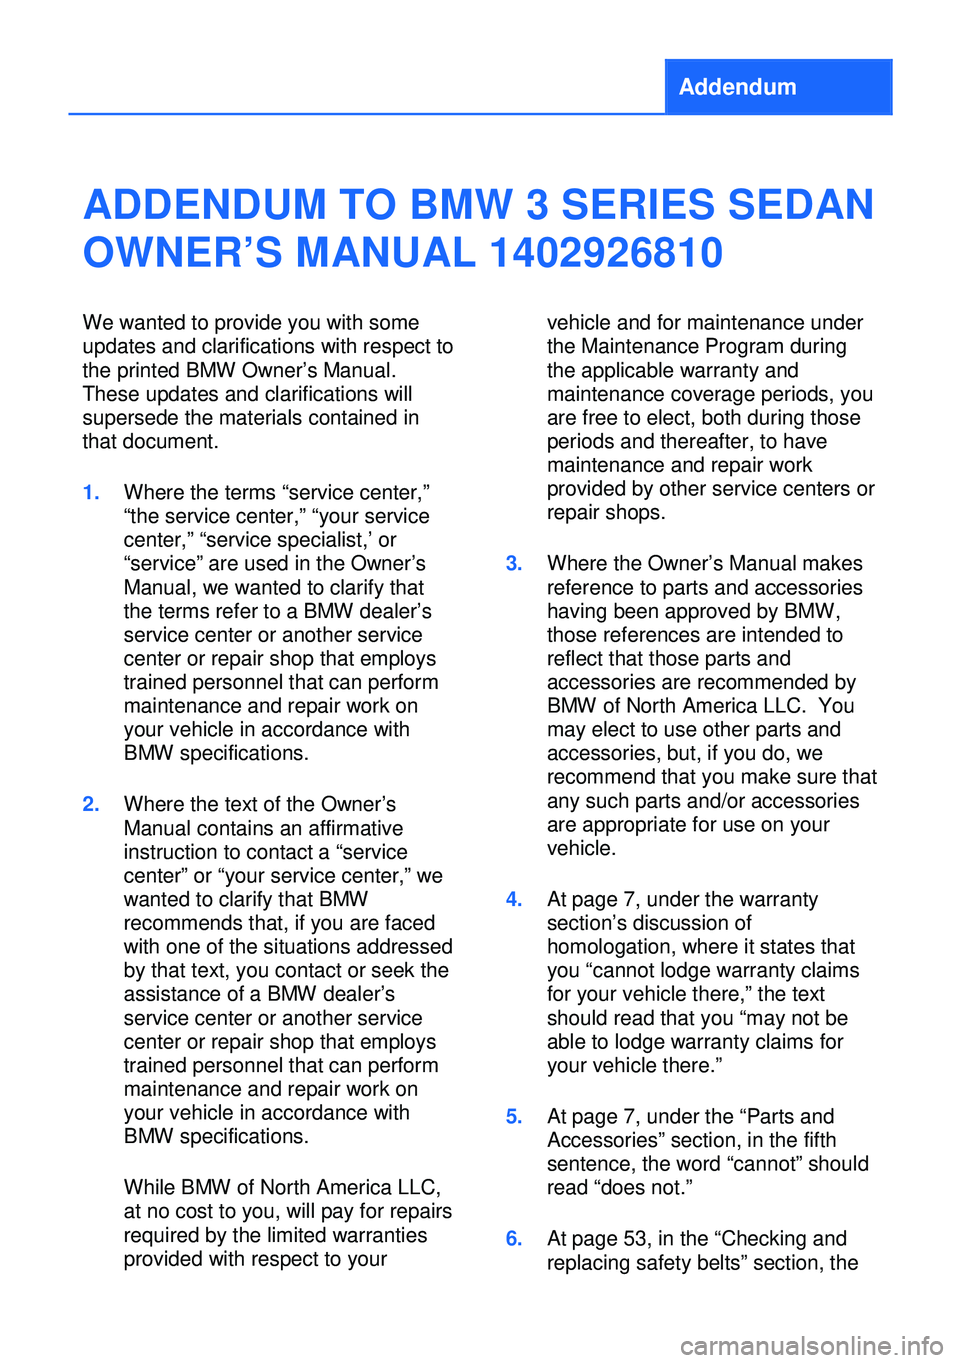 BMW 328I SEDAN 2013  Owners Manual Addendum
ADDENDUM TO BMW 3 SERIES SEDAN
OWNER’S MANUAL 1402926810
We wanted to provide you with some
updates and clarifications with respect to
the printed BMW Owner’s Manual.
These updates and cl